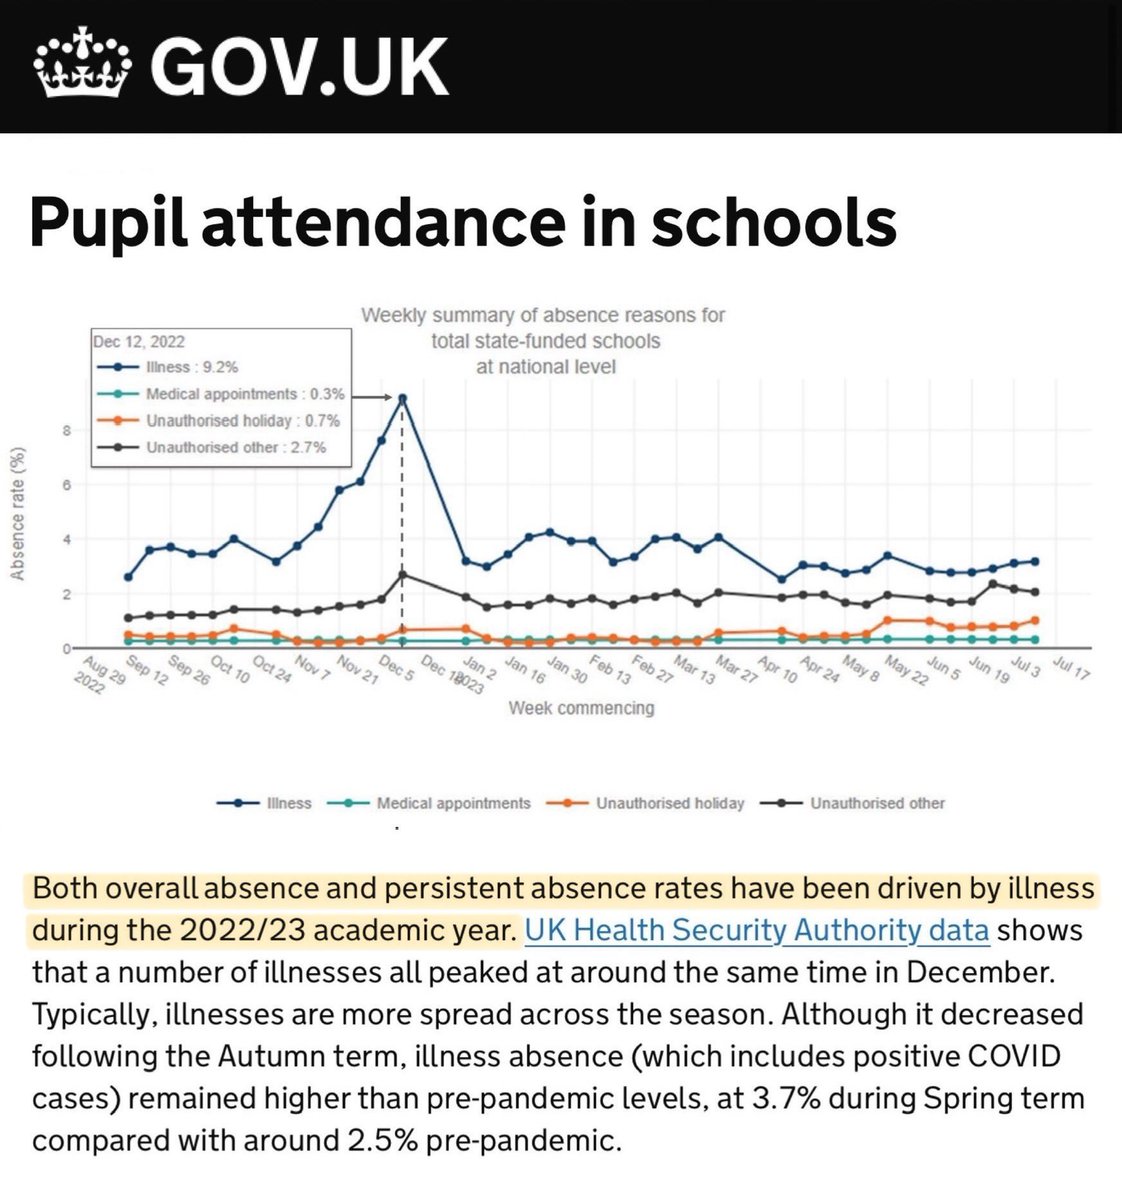 @educationgovuk @SRA_StAlbans This attendance campaign completely misses the mark.

Most kids WANT to be in school. They don’t want to miss out.

The biggest contributor towards absences is ILLNESS. Our kids are sick. A LOT.

And you’re encouraging sick kids to still come to school which just makes it worse!